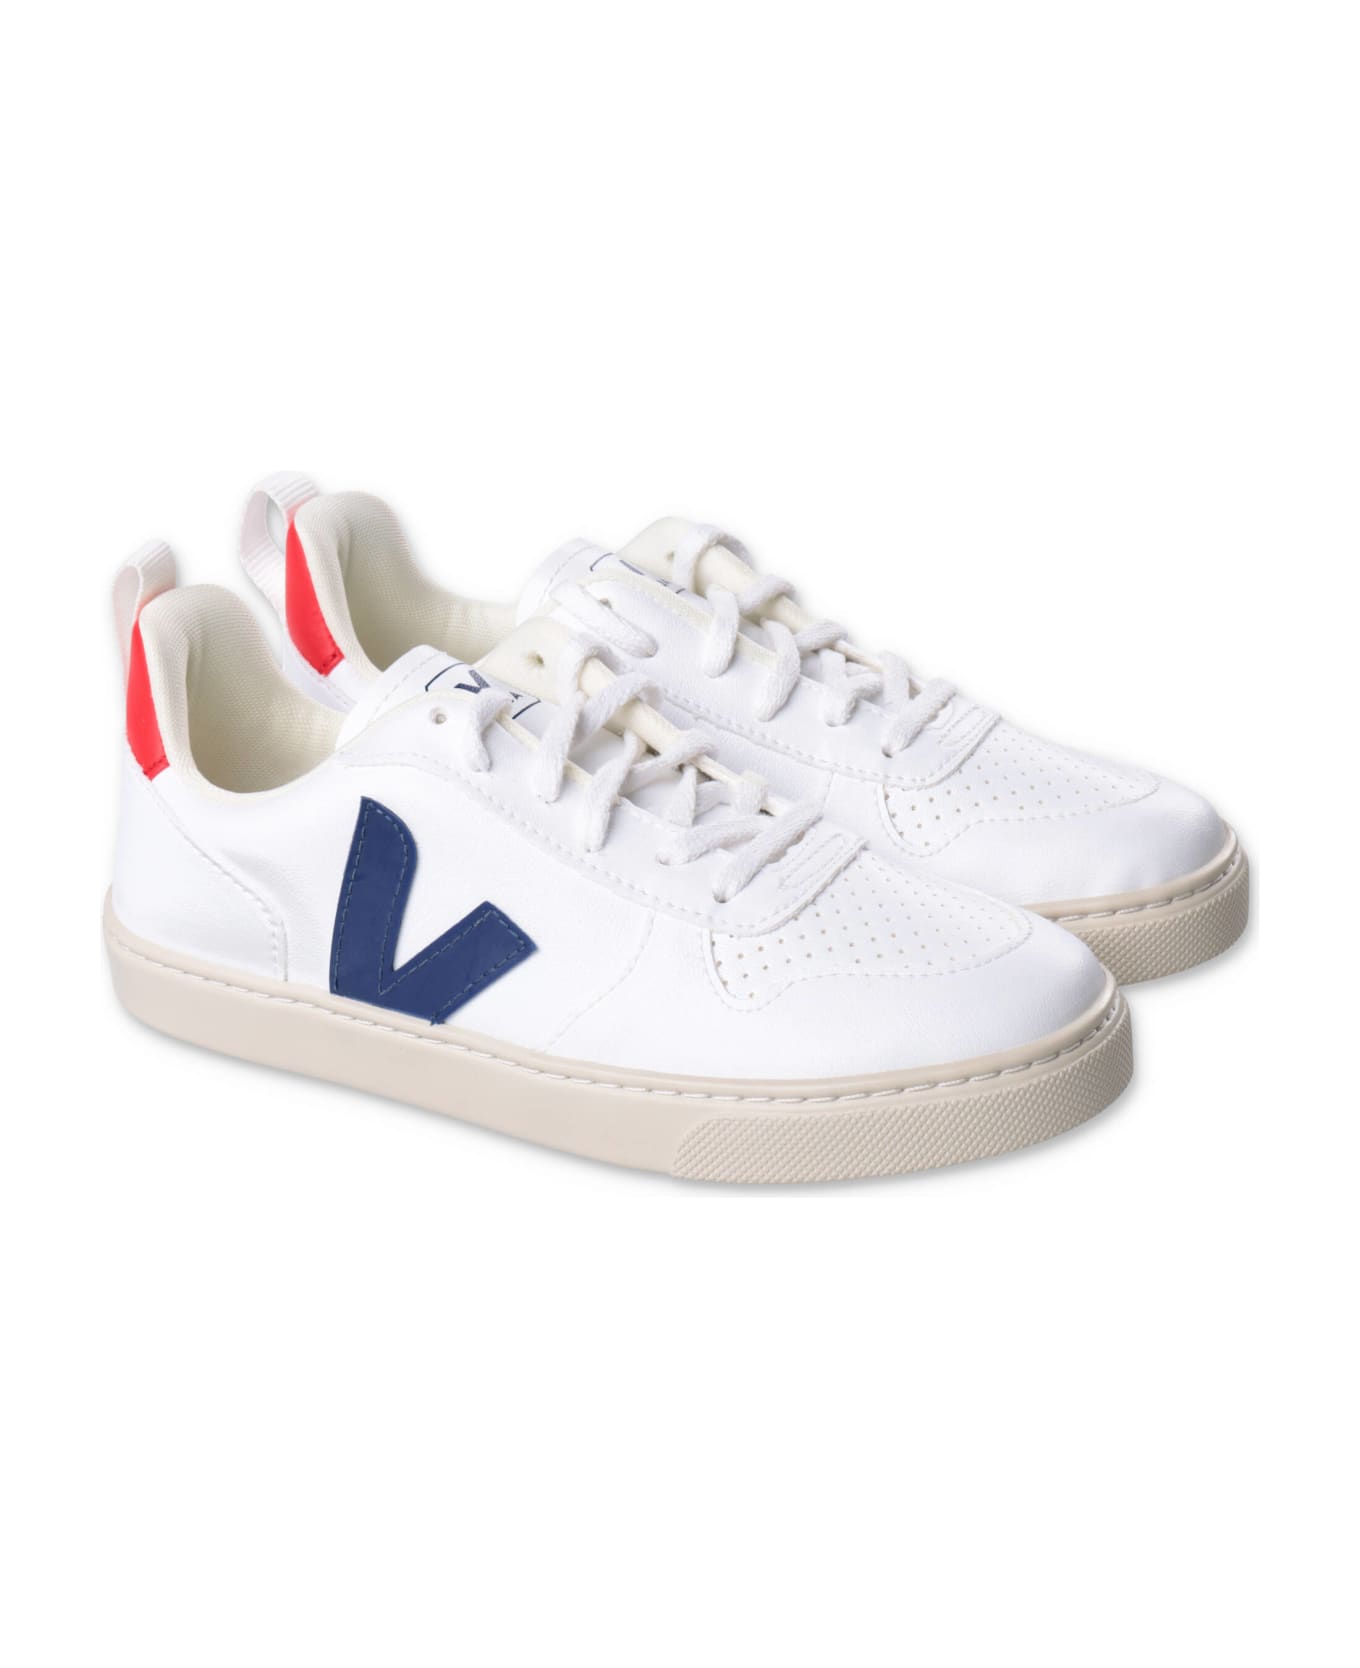 Veja Sneakers Bianche In Similpelle Con Lacci Bambino - Bianco